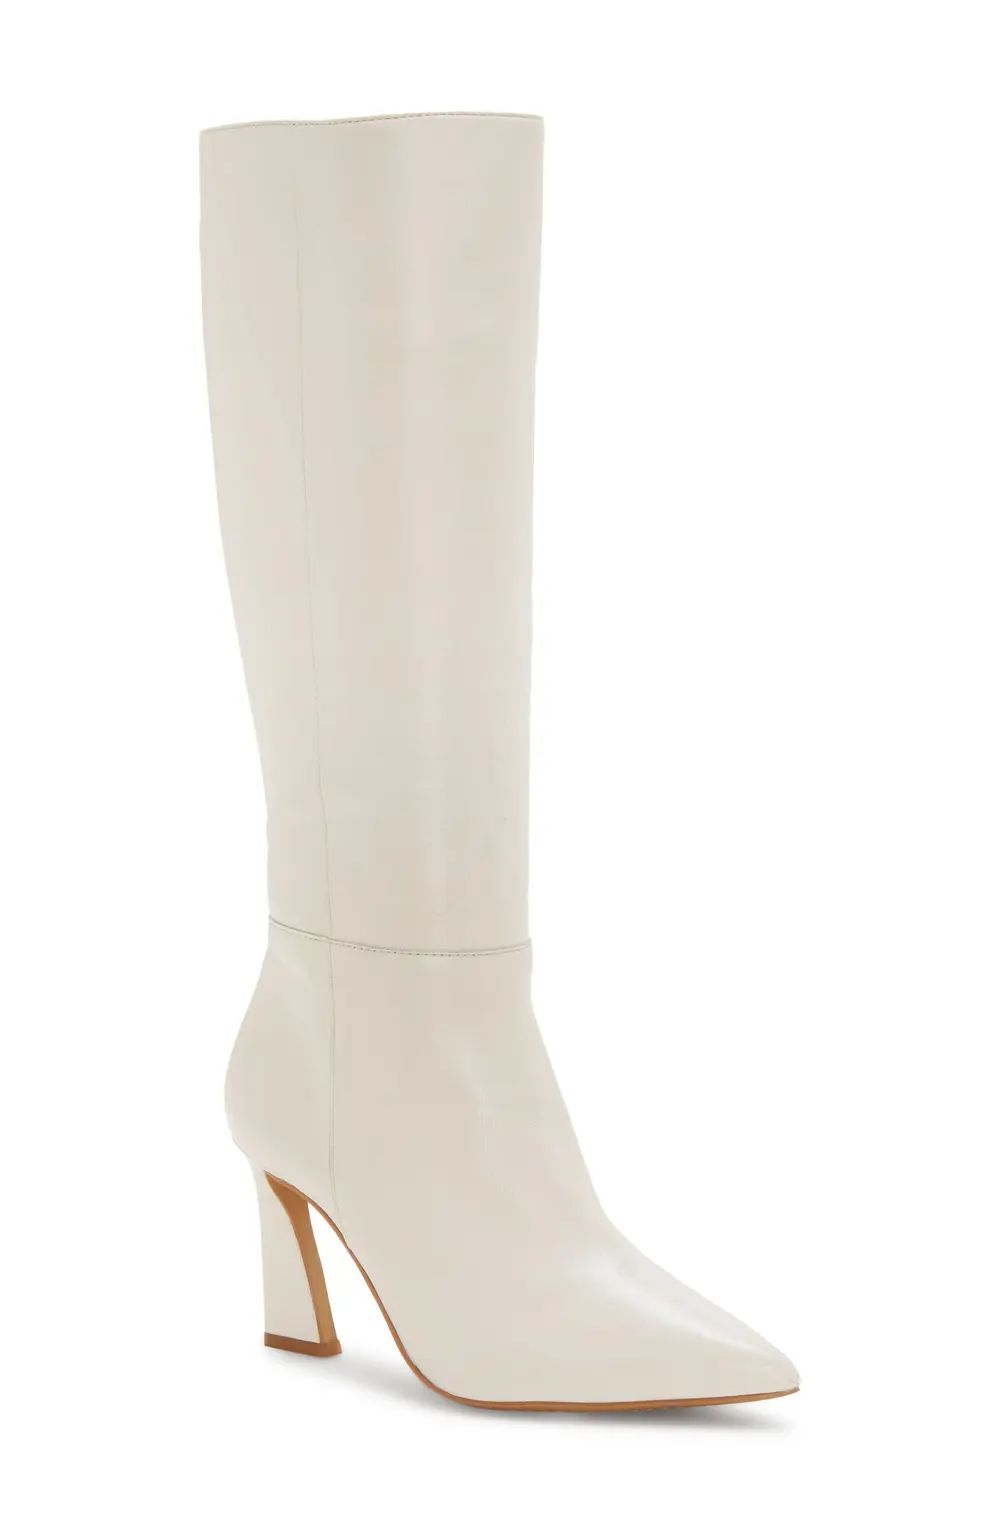 Vince Camuto Tressara Pointed Toe Knee High Boot, Size 5 Regular Calf in Creamy White at Nordstrom | Nordstrom Canada